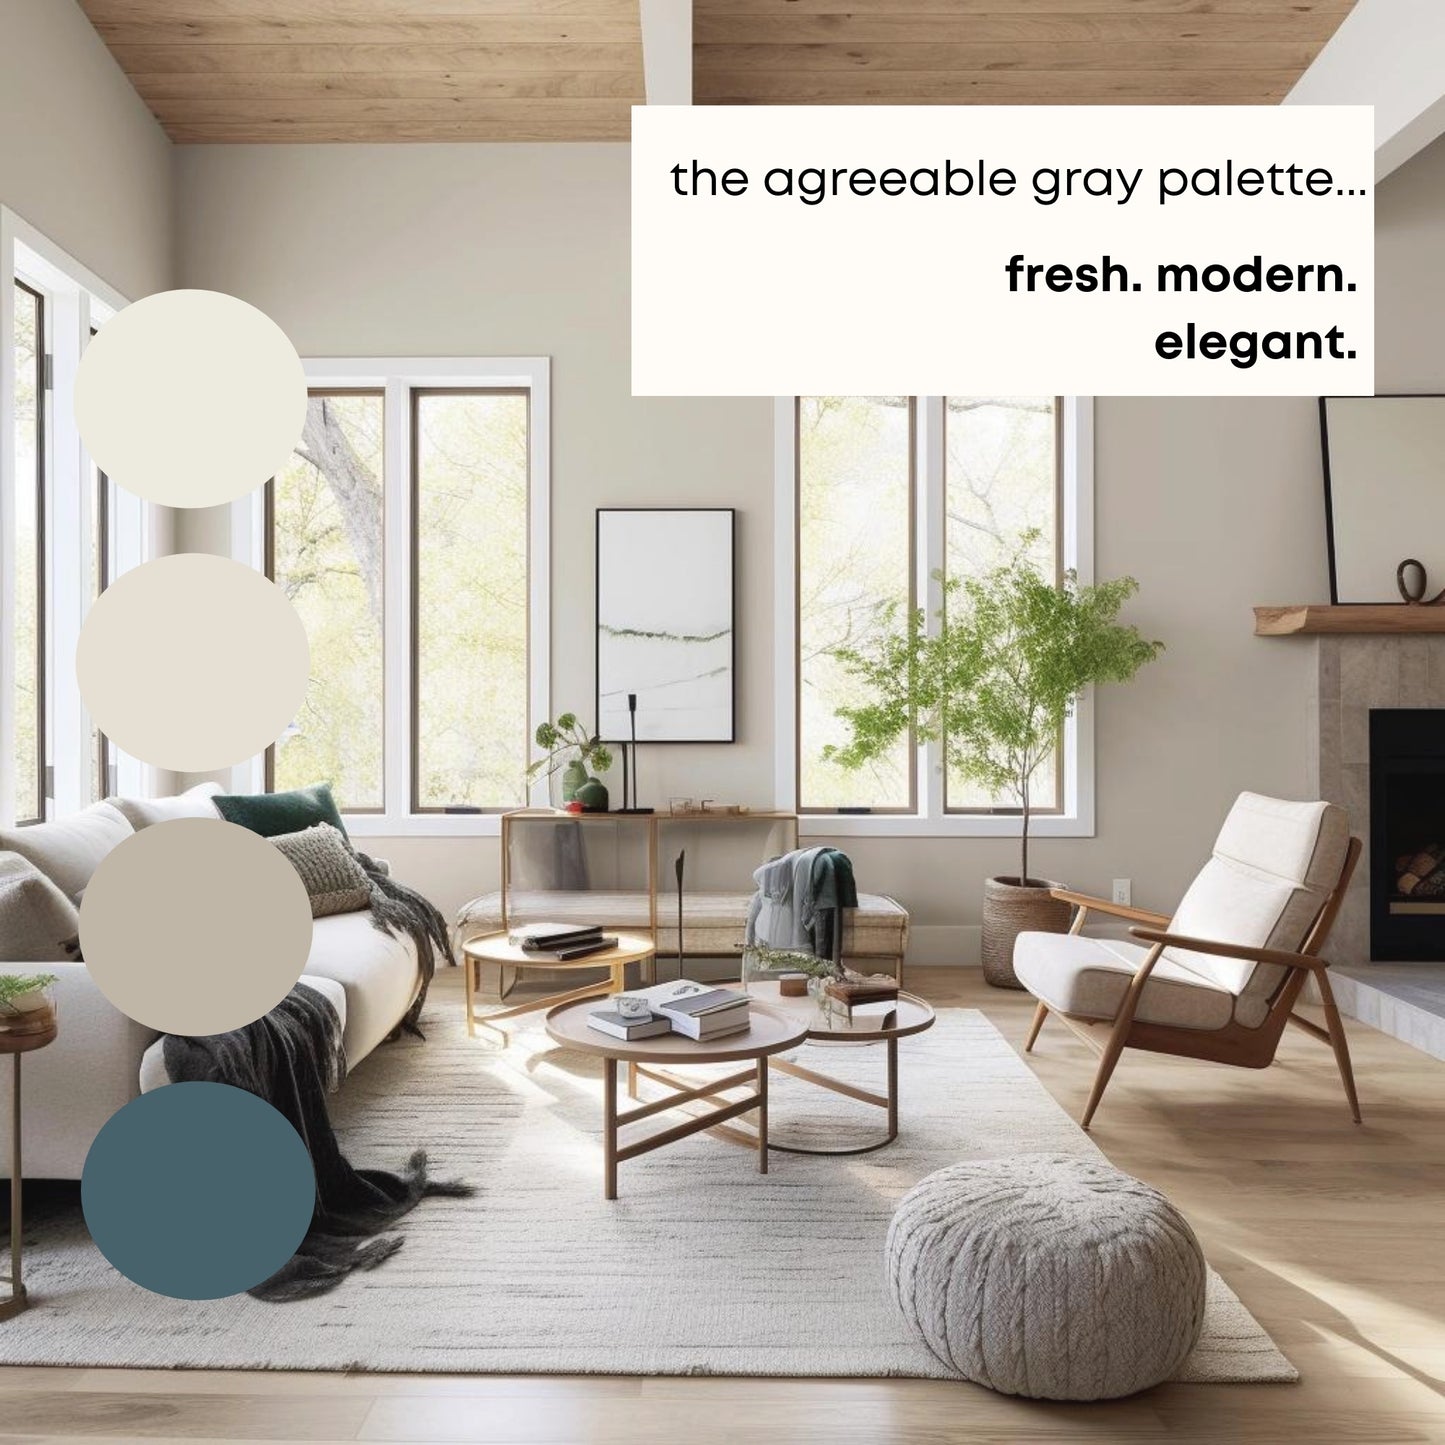 Agreeable Gray Sherwin Williams Paint Palette - Modern Neutral Interior Paint Colors for Home - Coordinating Interior Design Color Palette, Sherwin Williams